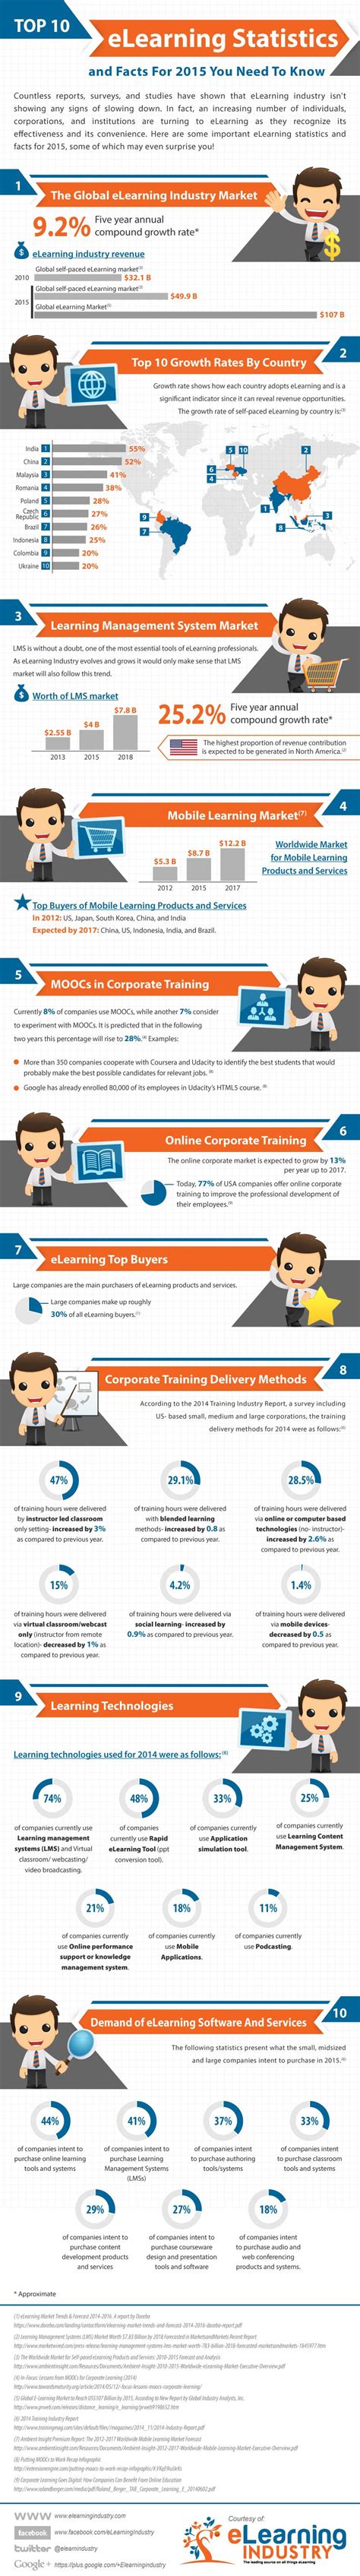 Top Elearning Stats And Facts For 2015 Infographic E Learning